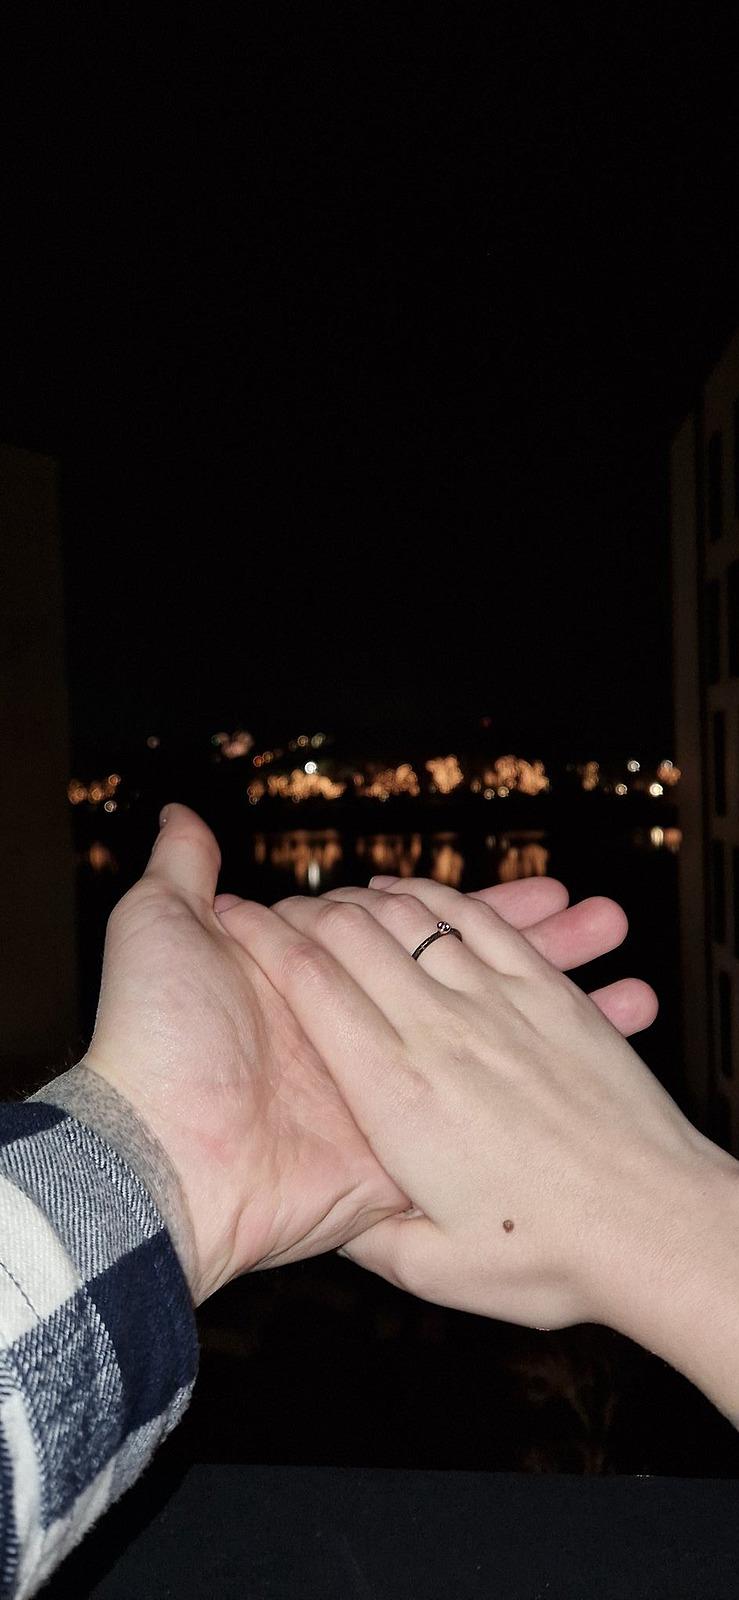 A player from the Natus Vincere CS 2 team, Justinas “jL” Lekavicius, announced his engagement to a girl named Kamila.